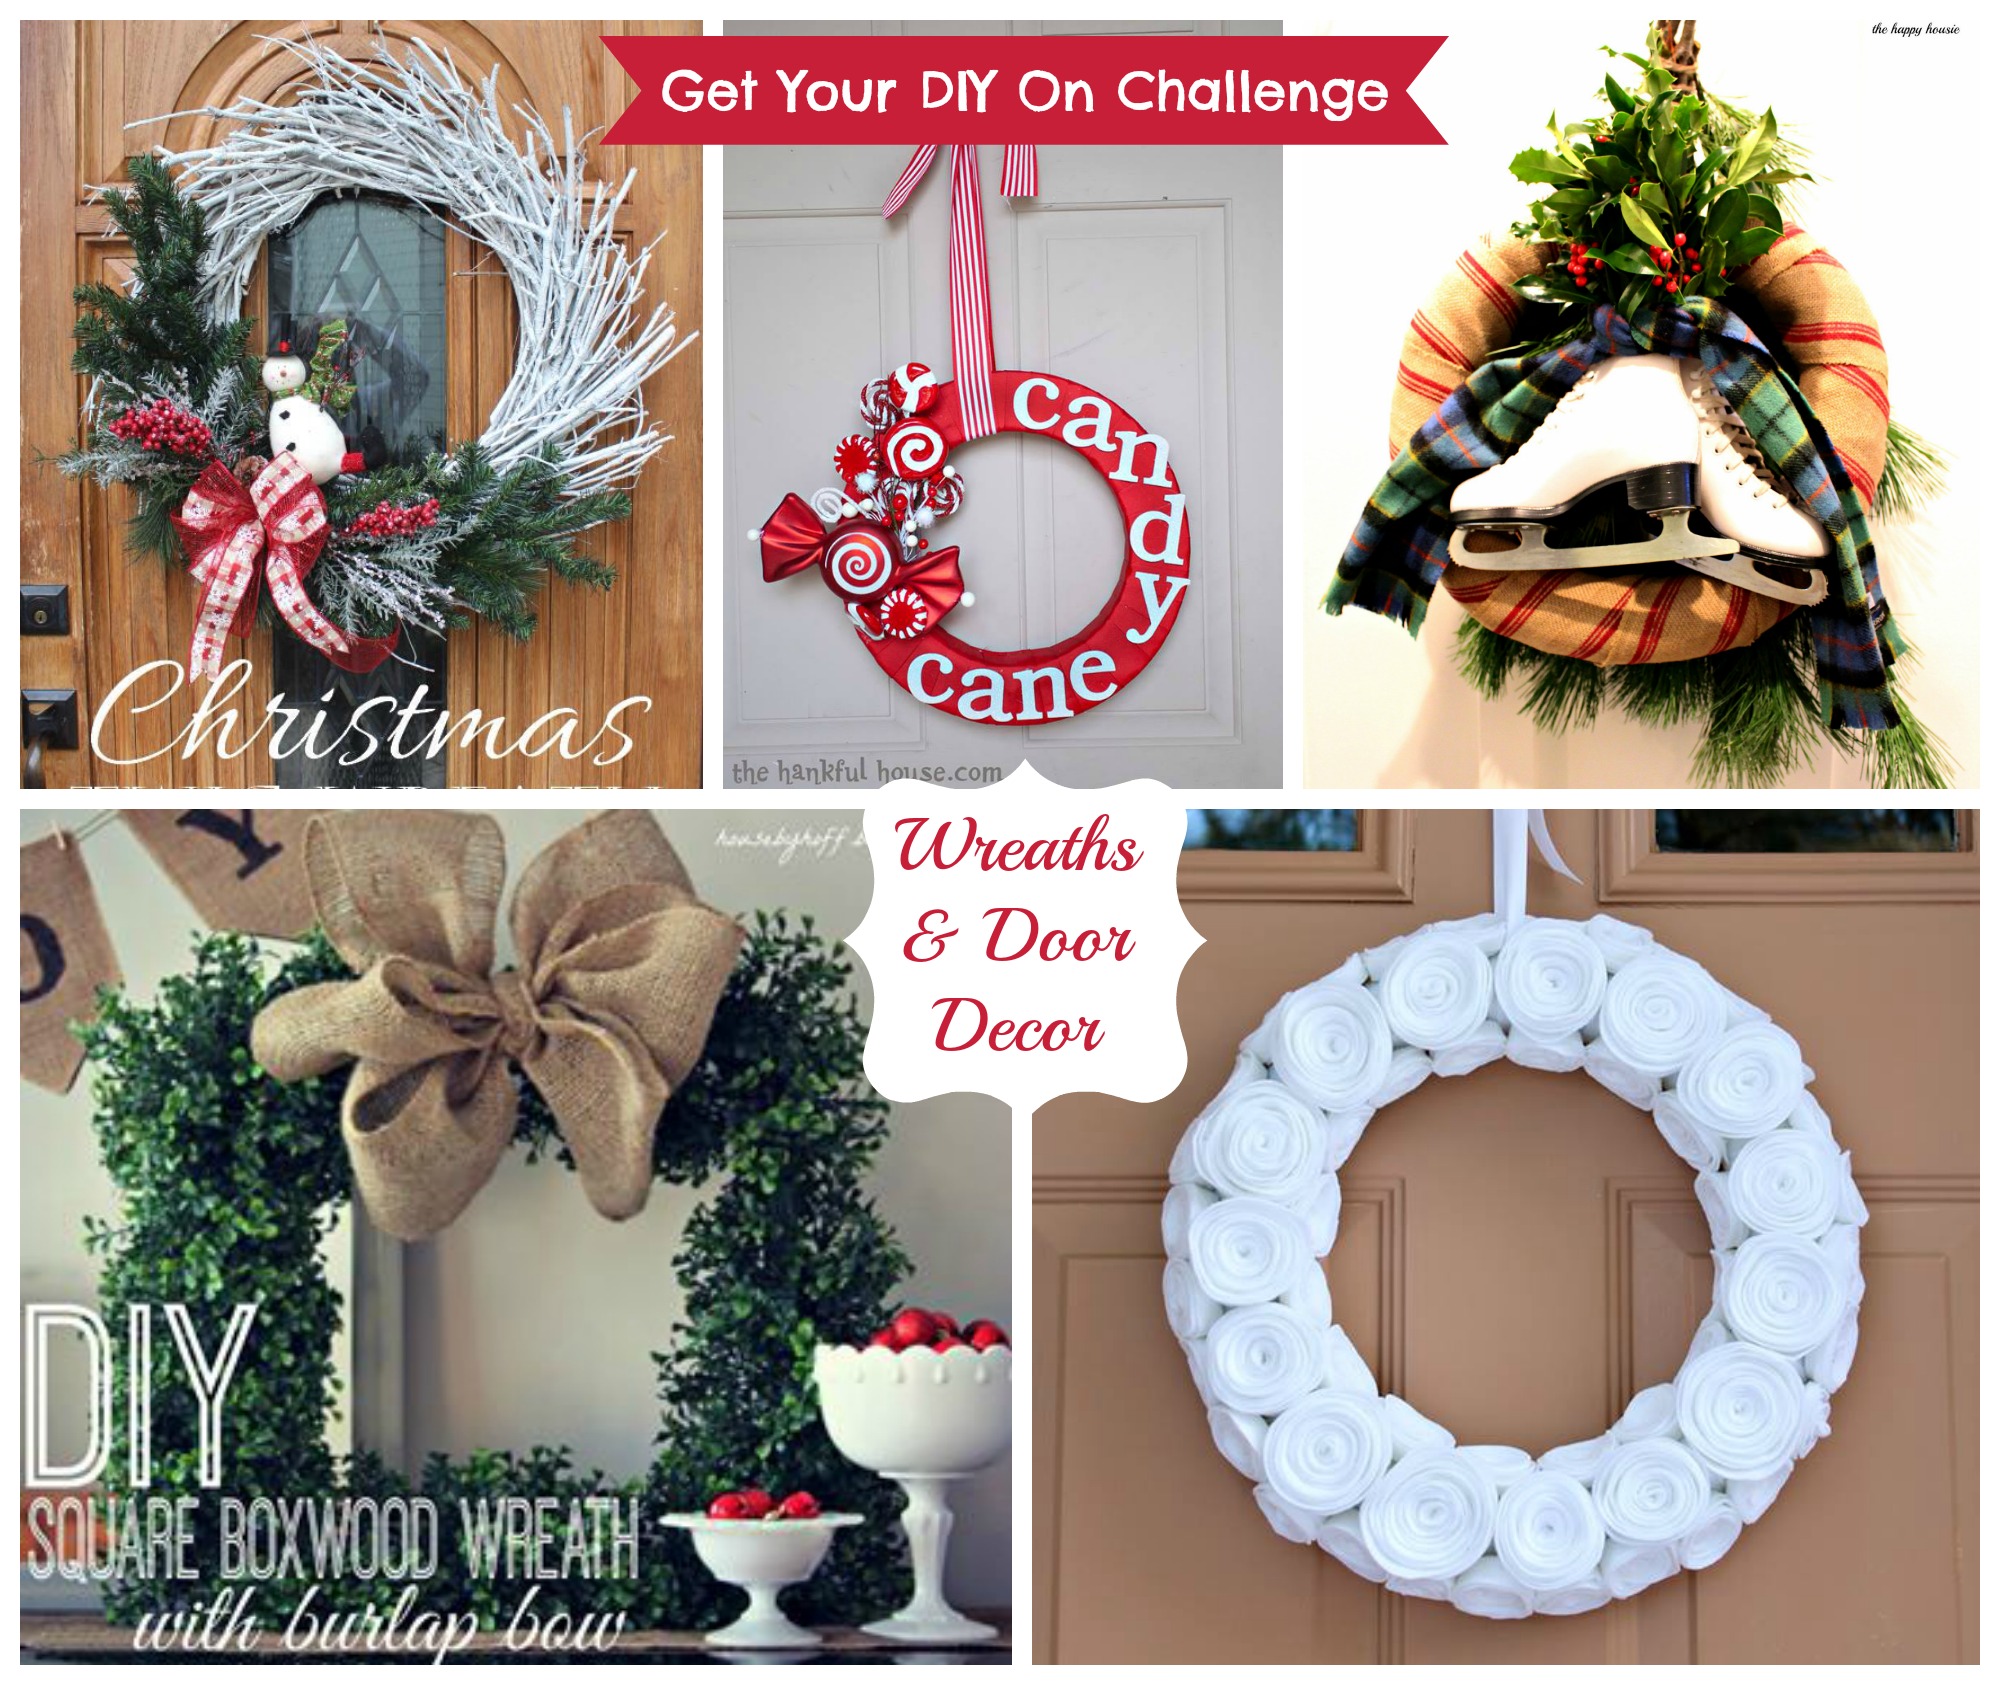 Get Your DIY On Challenge: Time to Share Your Wreaths and Door Decor {plus features}